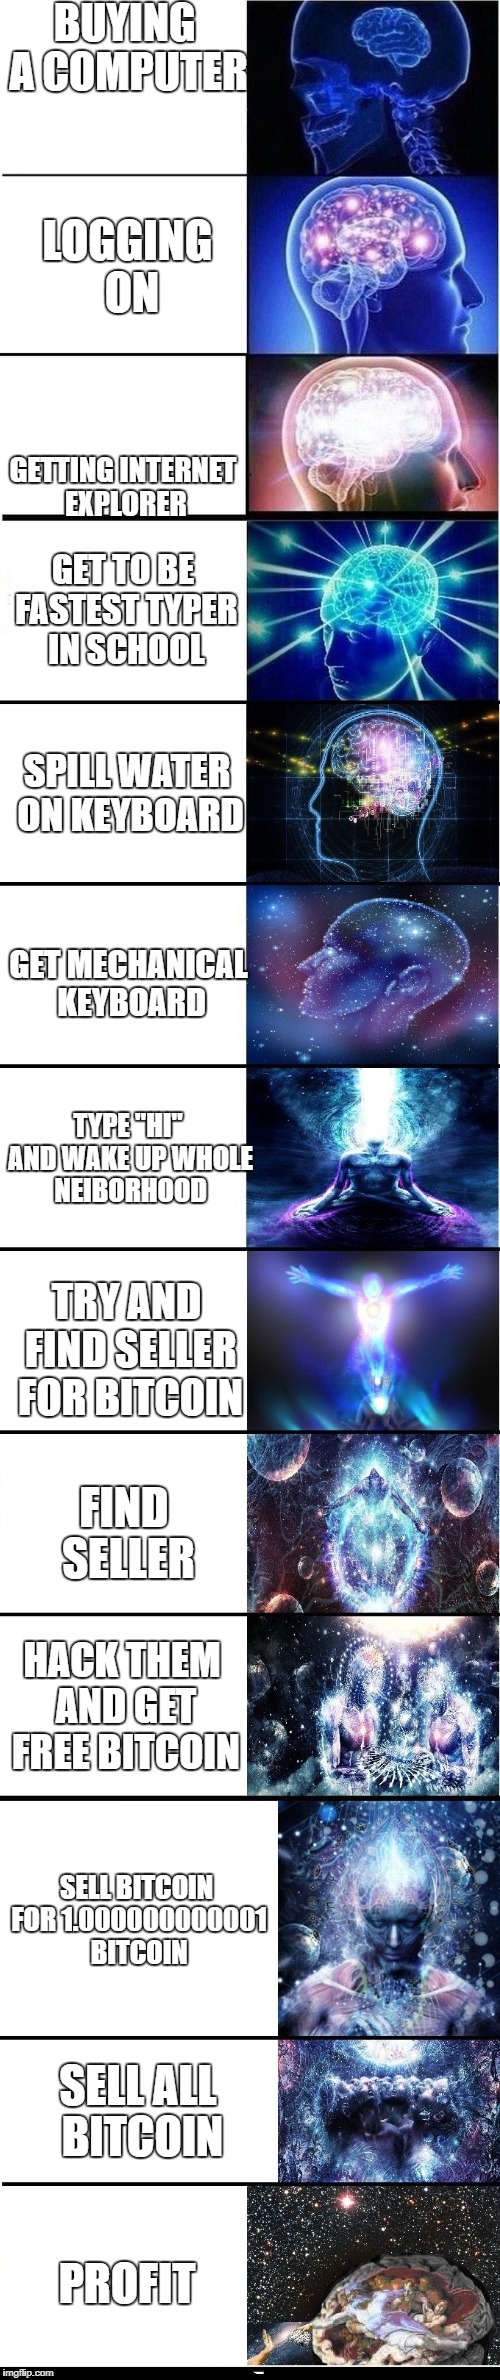 KNOWLEDGE | BUYING A COMPUTER; LOGGING ON; GETTING INTERNET EXPLORER; GET TO BE FASTEST TYPER IN SCHOOL; SPILL WATER ON KEYBOARD; GET MECHANICAL KEYBOARD; TYPE "HI" AND WAKE UP WHOLE NEIBORHOOD; TRY AND FIND SELLER FOR BITCOIN; FIND SELLER; HACK THEM AND GET FREE BITCOIN; SELL BITCOIN FOR 1.000000000001 BITCOIN; SELL ALL BITCOIN; PROFIT | image tagged in expanding brain extended | made w/ Imgflip meme maker